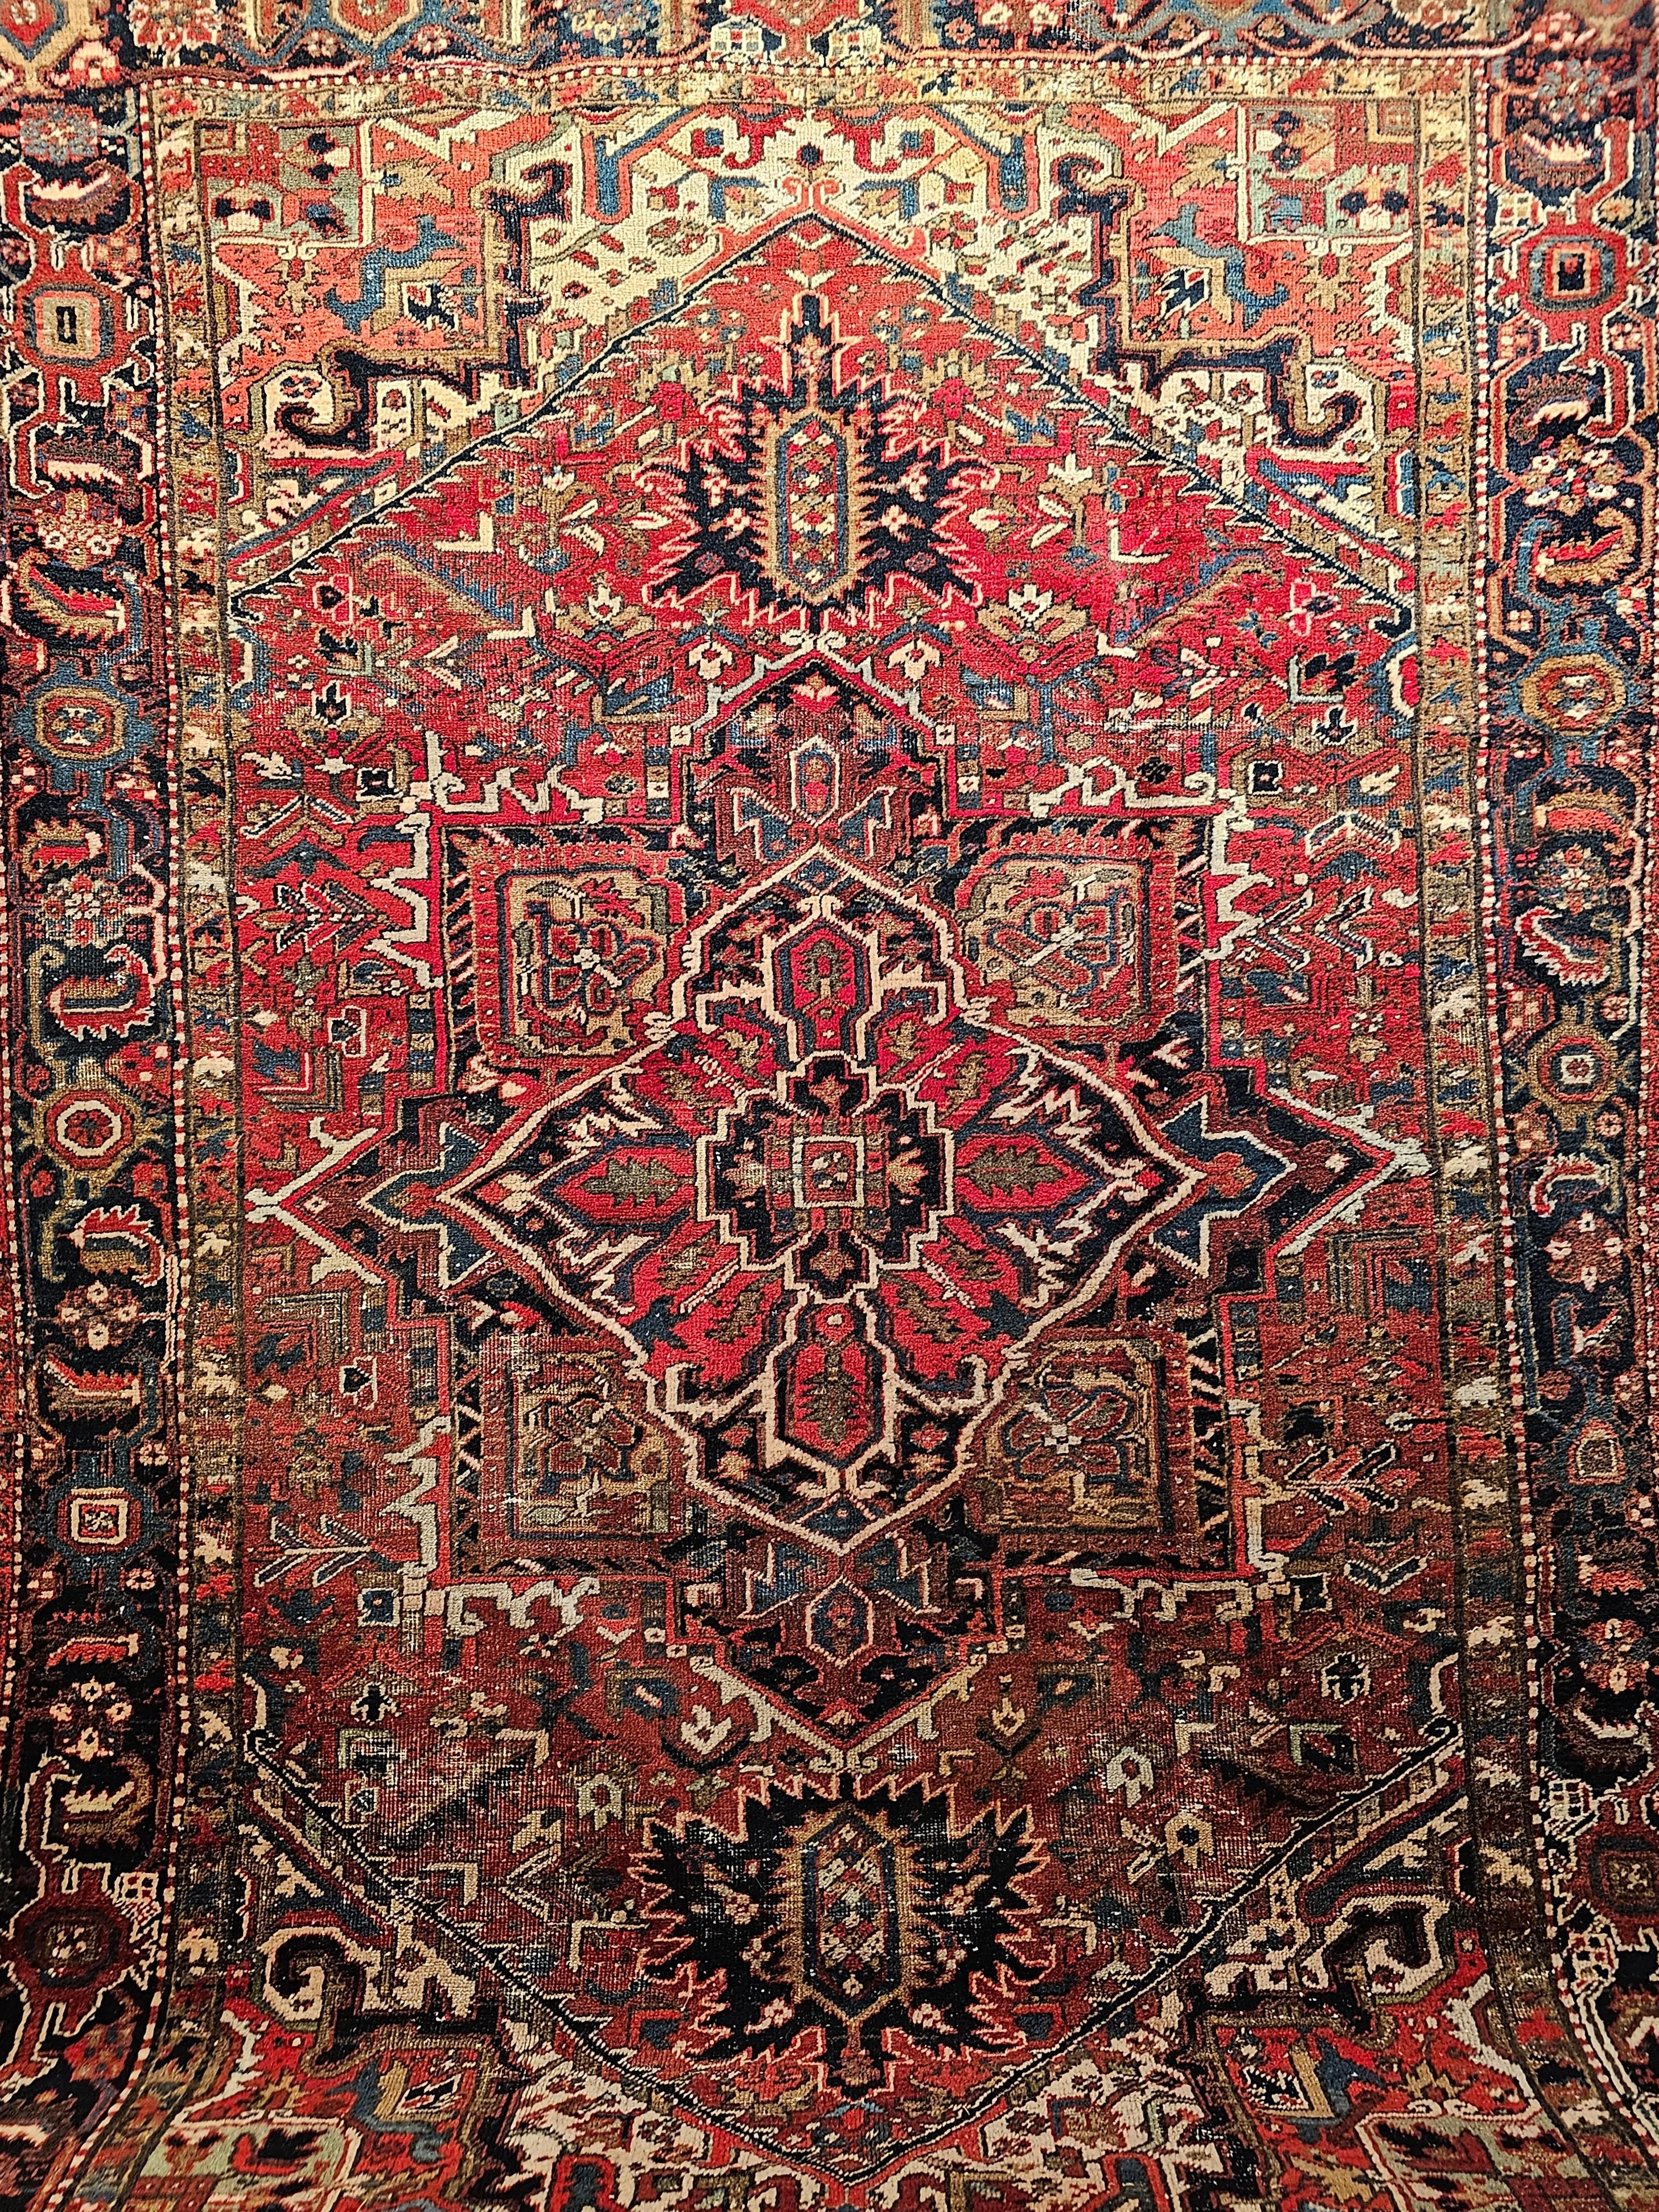 Beautiful and very colorful vintage Persian Heriz room size rug from the 1st quarter of the 20th century.  The primary color in the field is red with a central medallion center in red and the medallion corners in mustard yellow with accent colors in